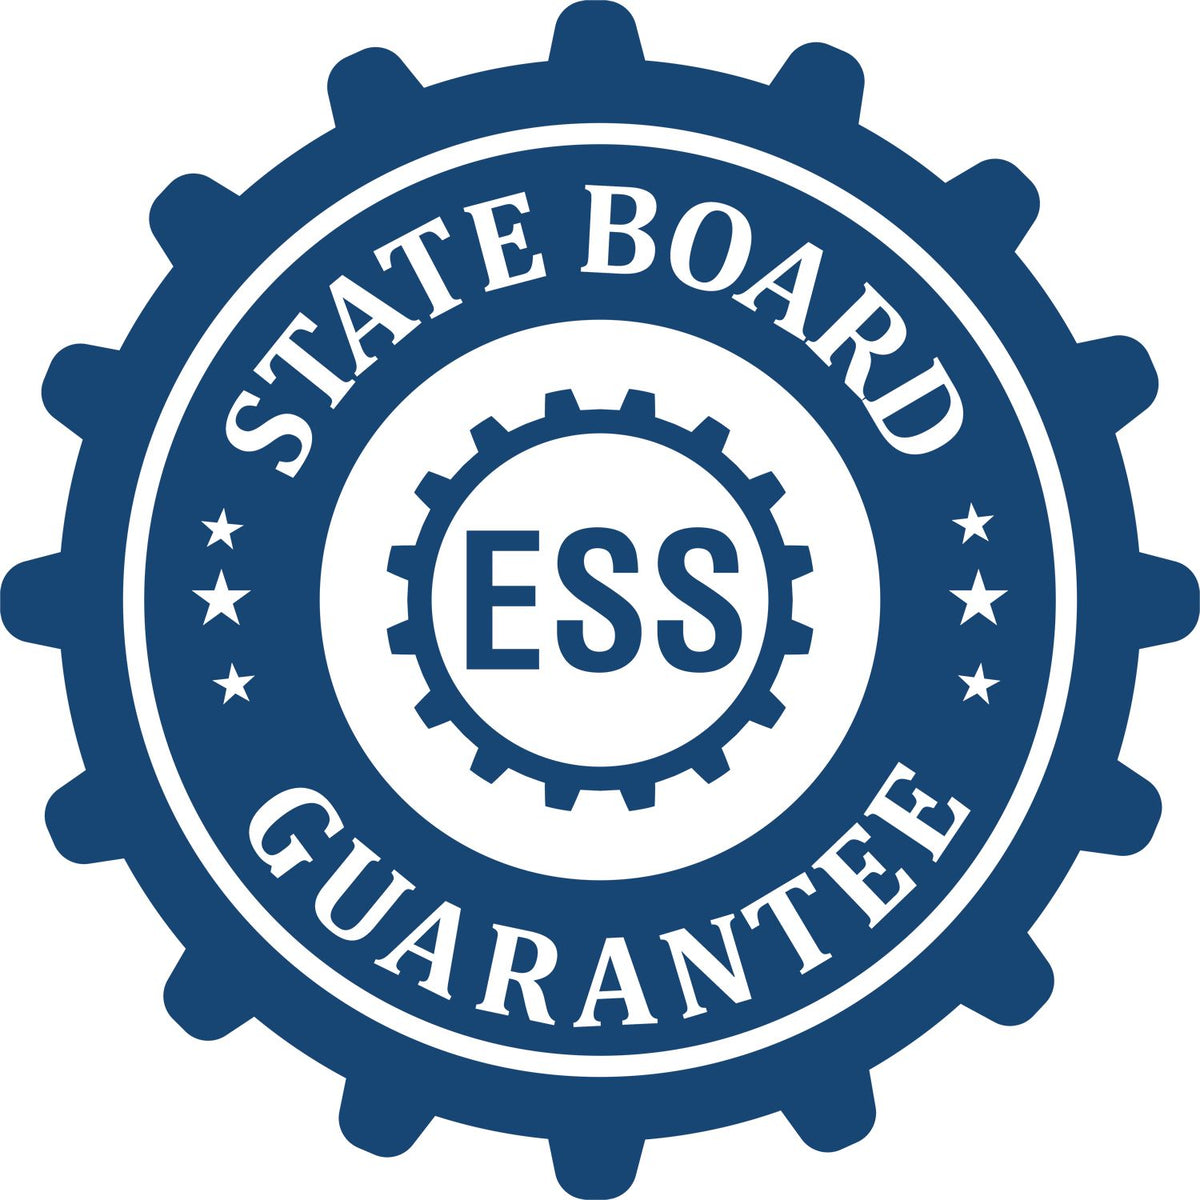 An emblem in a gear shape illustrating a state board guarantee for the Premium MaxLight Pre-Inked Maine Engineering Stamp product.